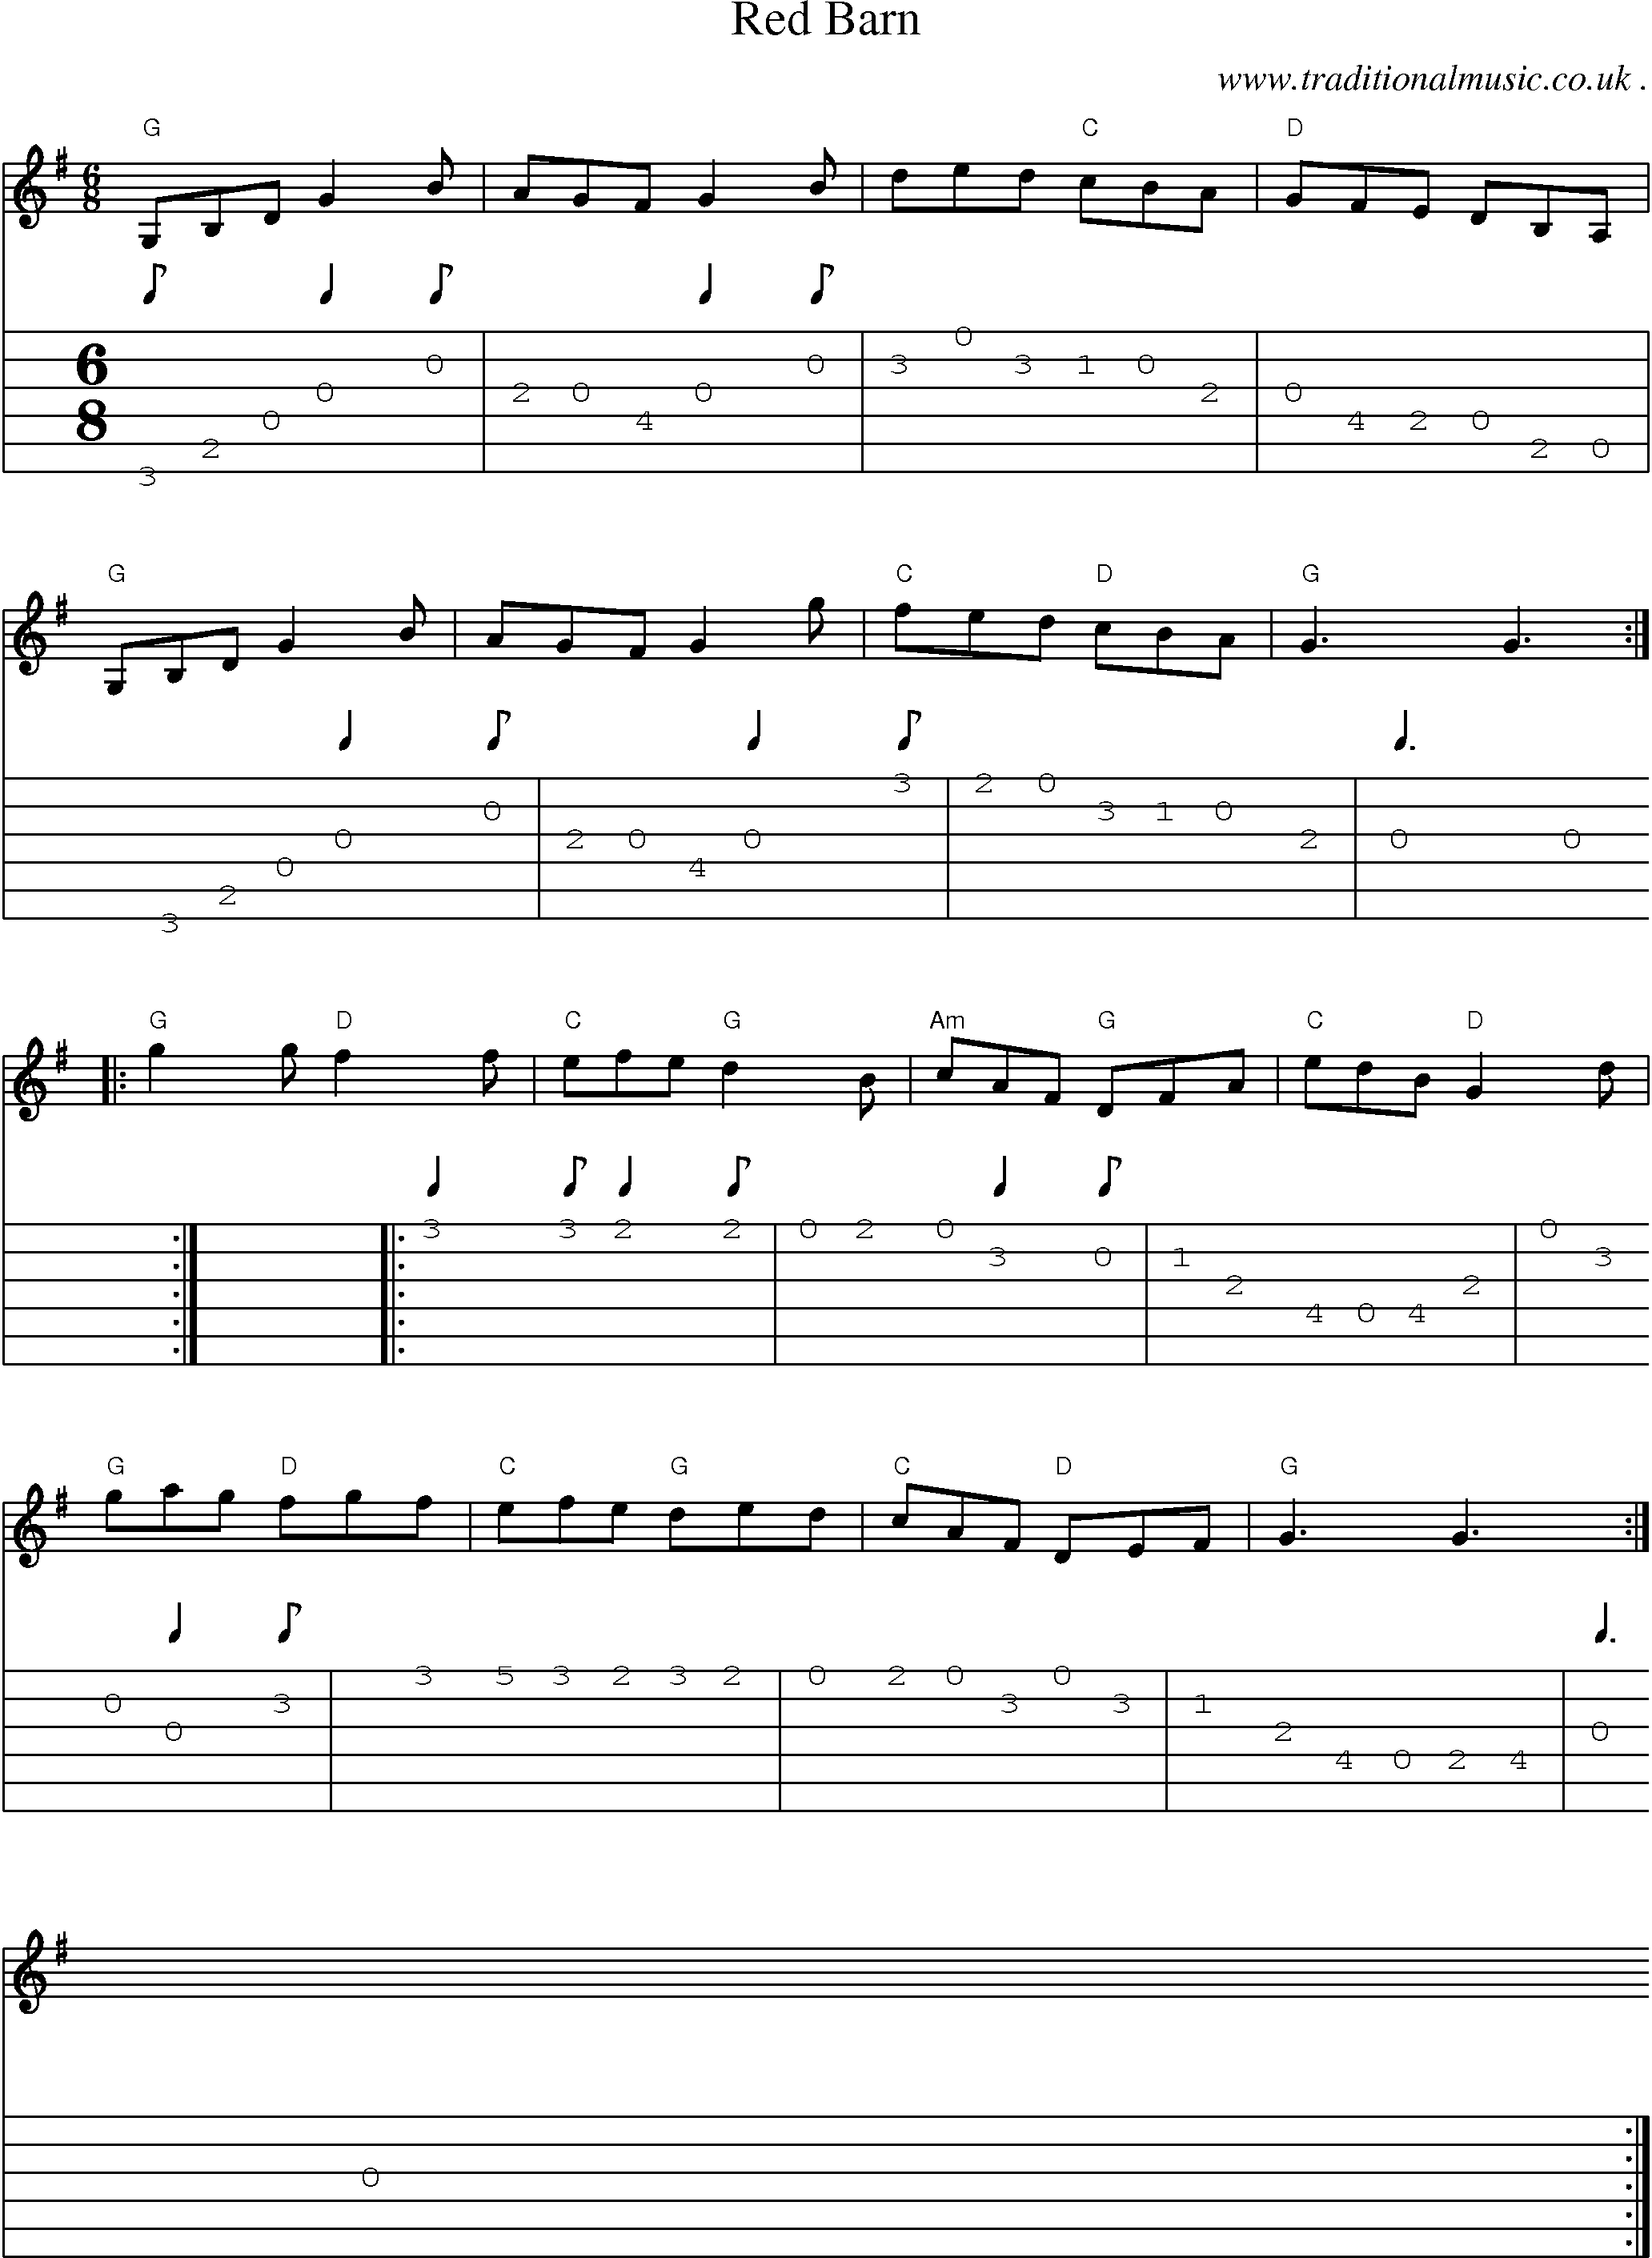 Sheet-music  score, Chords and Guitar Tabs for Red Barn